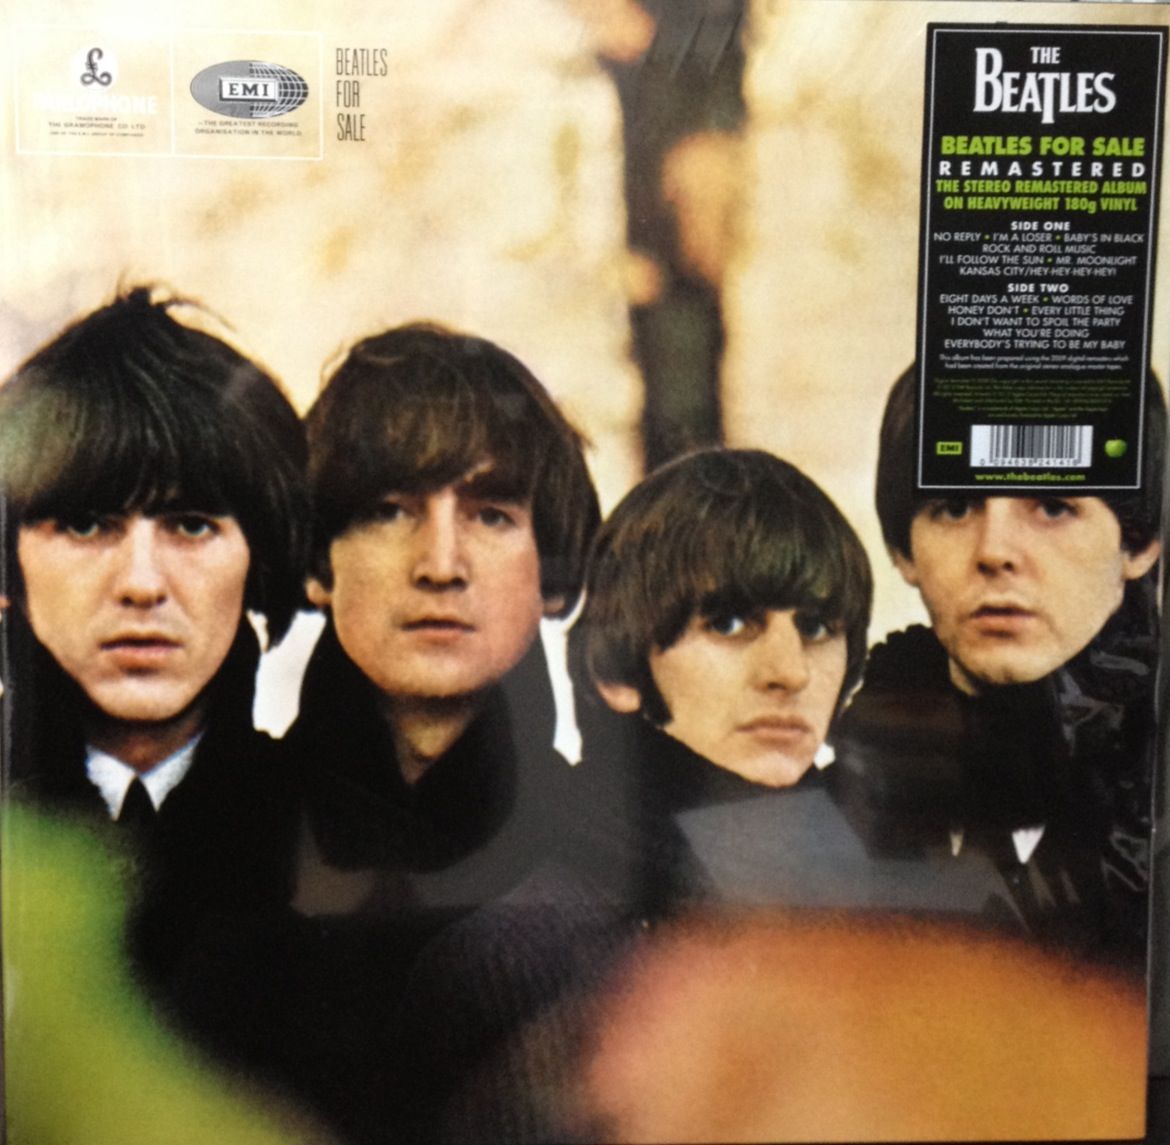 [2012] The Beatles Remaster Stereo LP [Beatles For Sale] : おんがくりょこう